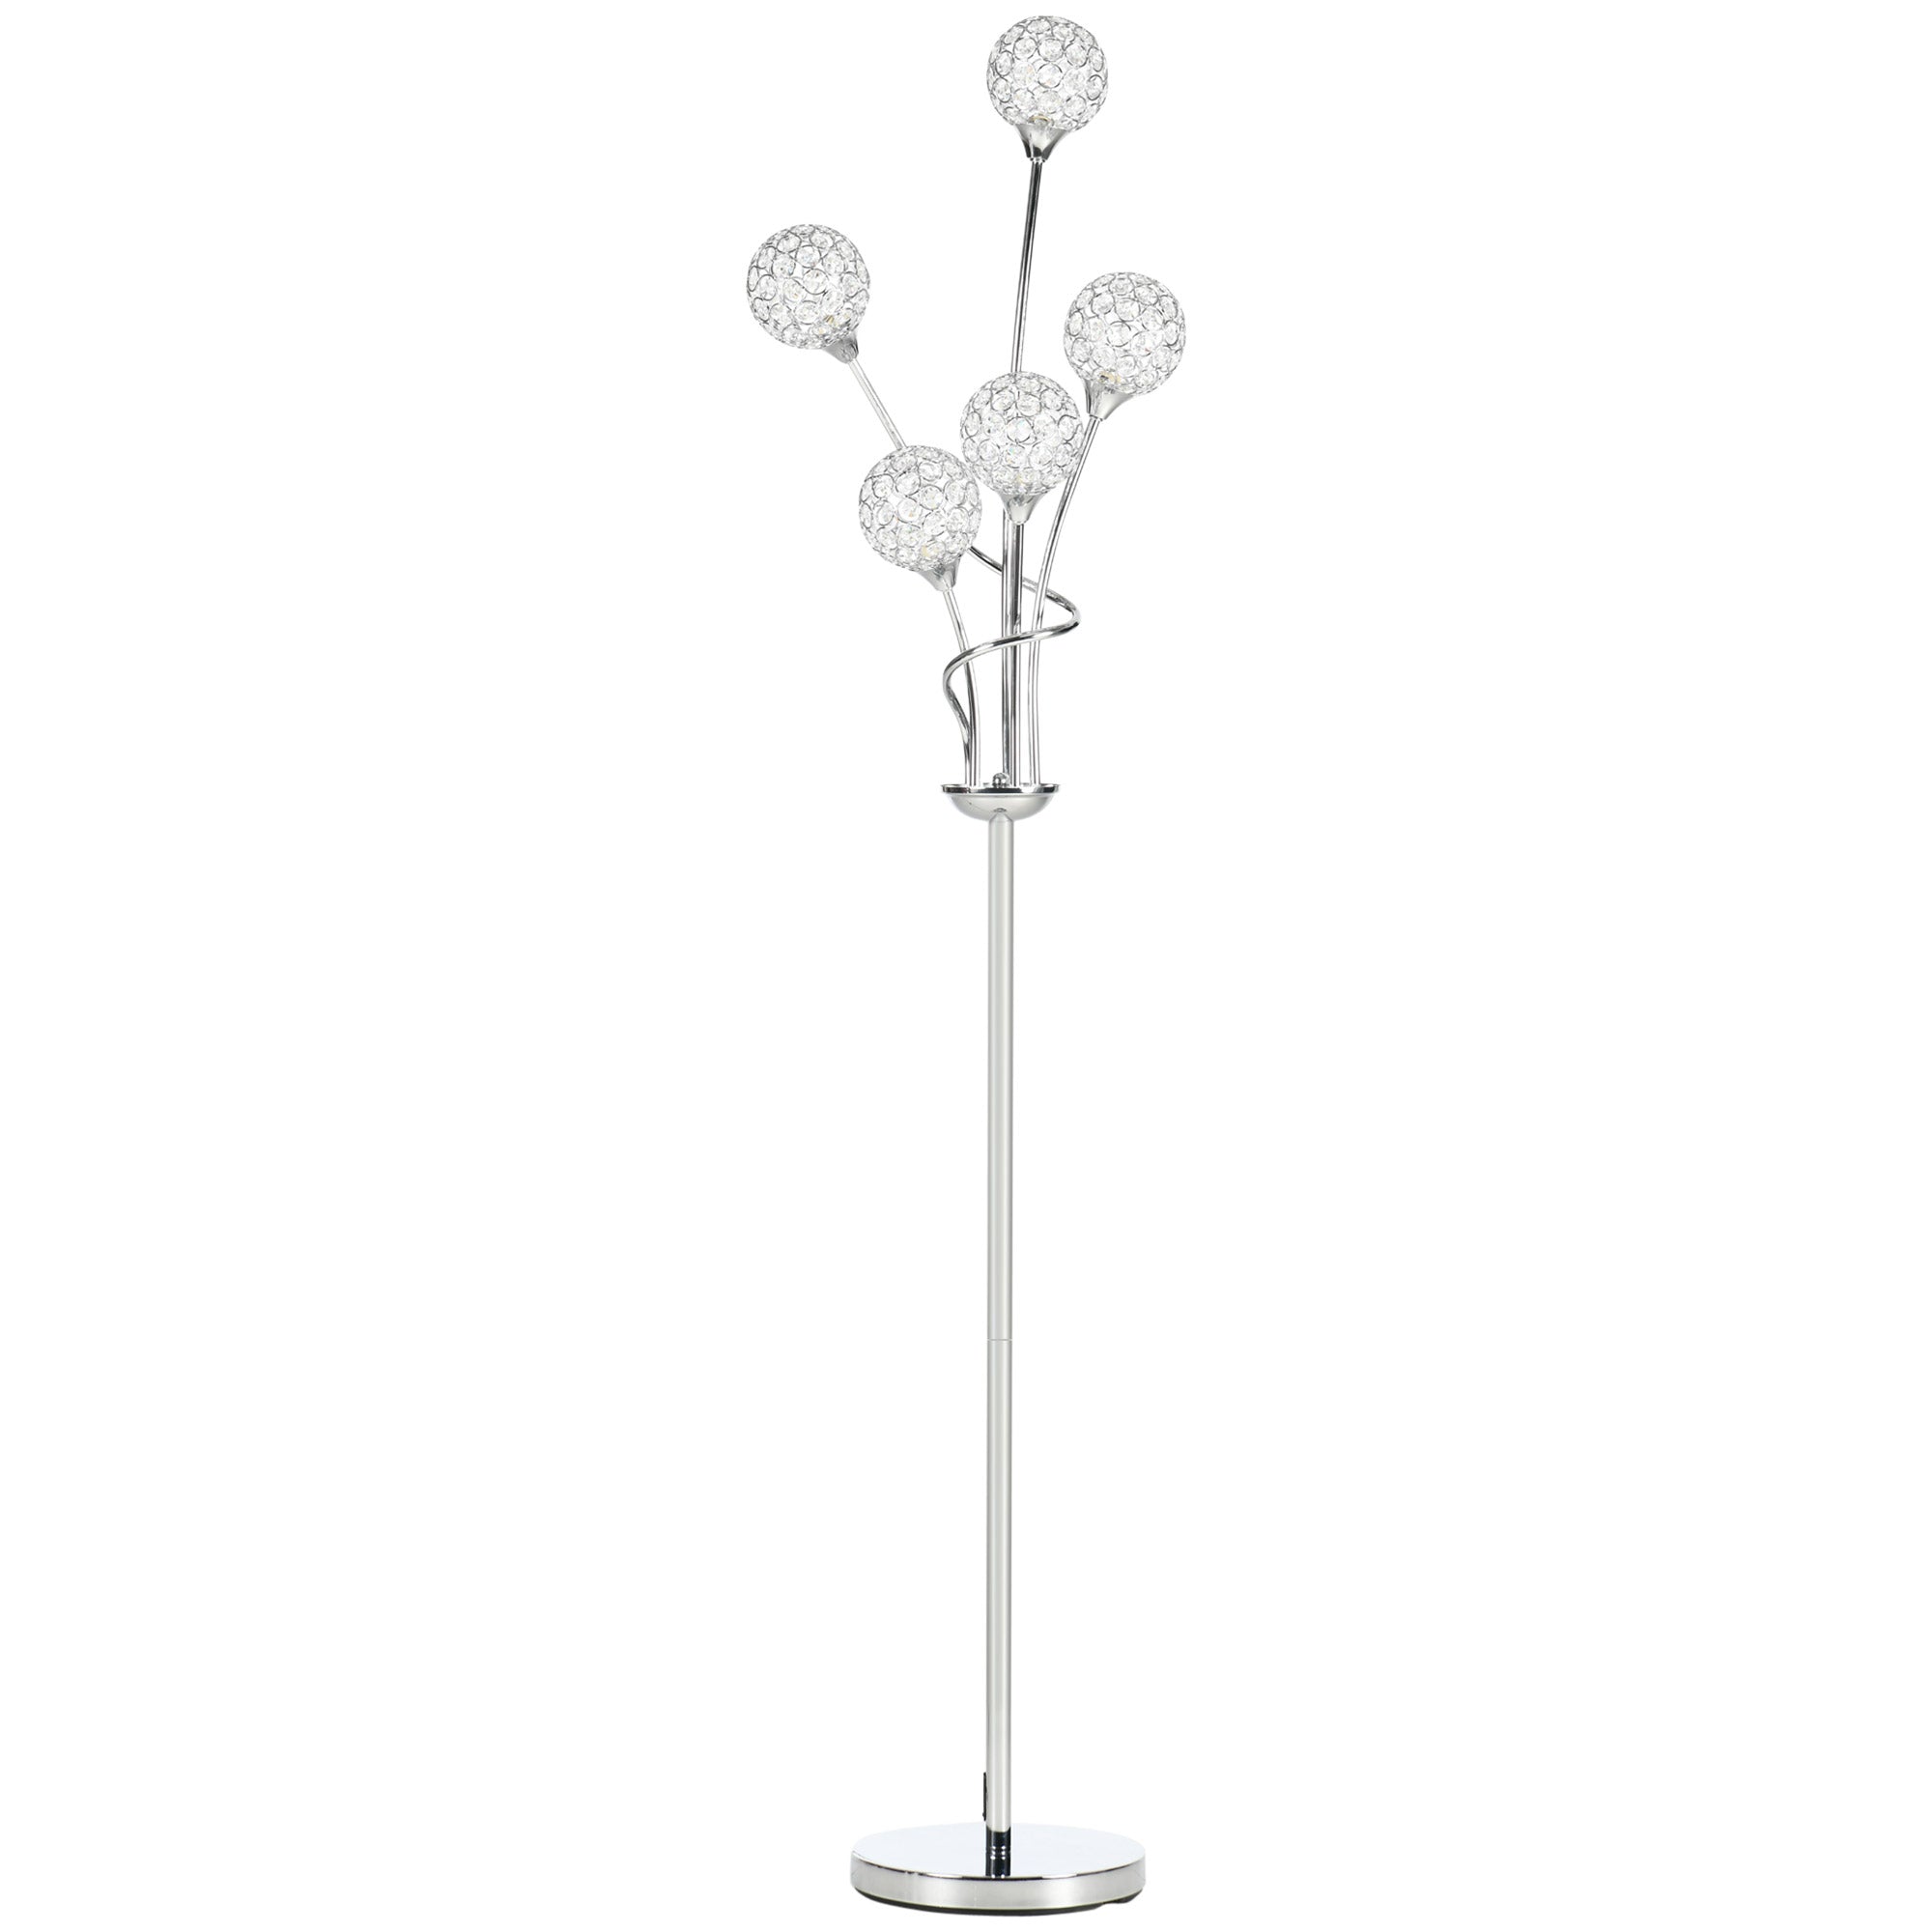 Crystal Floor Lamps for Living Room Bedroom with 5 Light, Modern Upright Standing Lamp, 34x25x156cm, Silver  AOSOM   